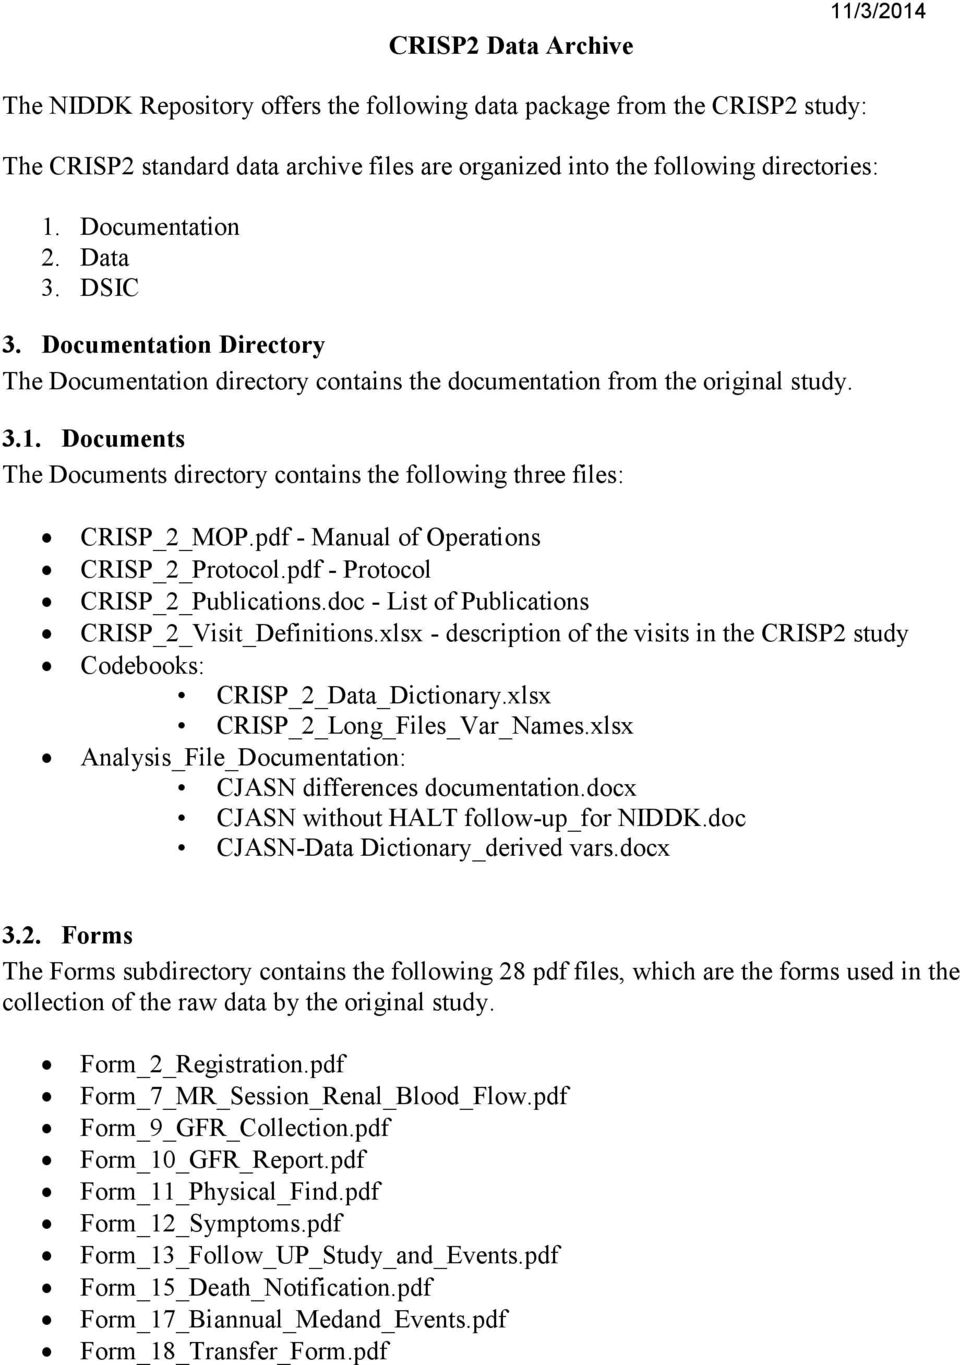 Documents The Documents directory contains the following three files: CRISP_2_MOP.pdf - Manual of Operations CRISP_2_Protocol.pdf - Protocol CRISP_2_Publications.